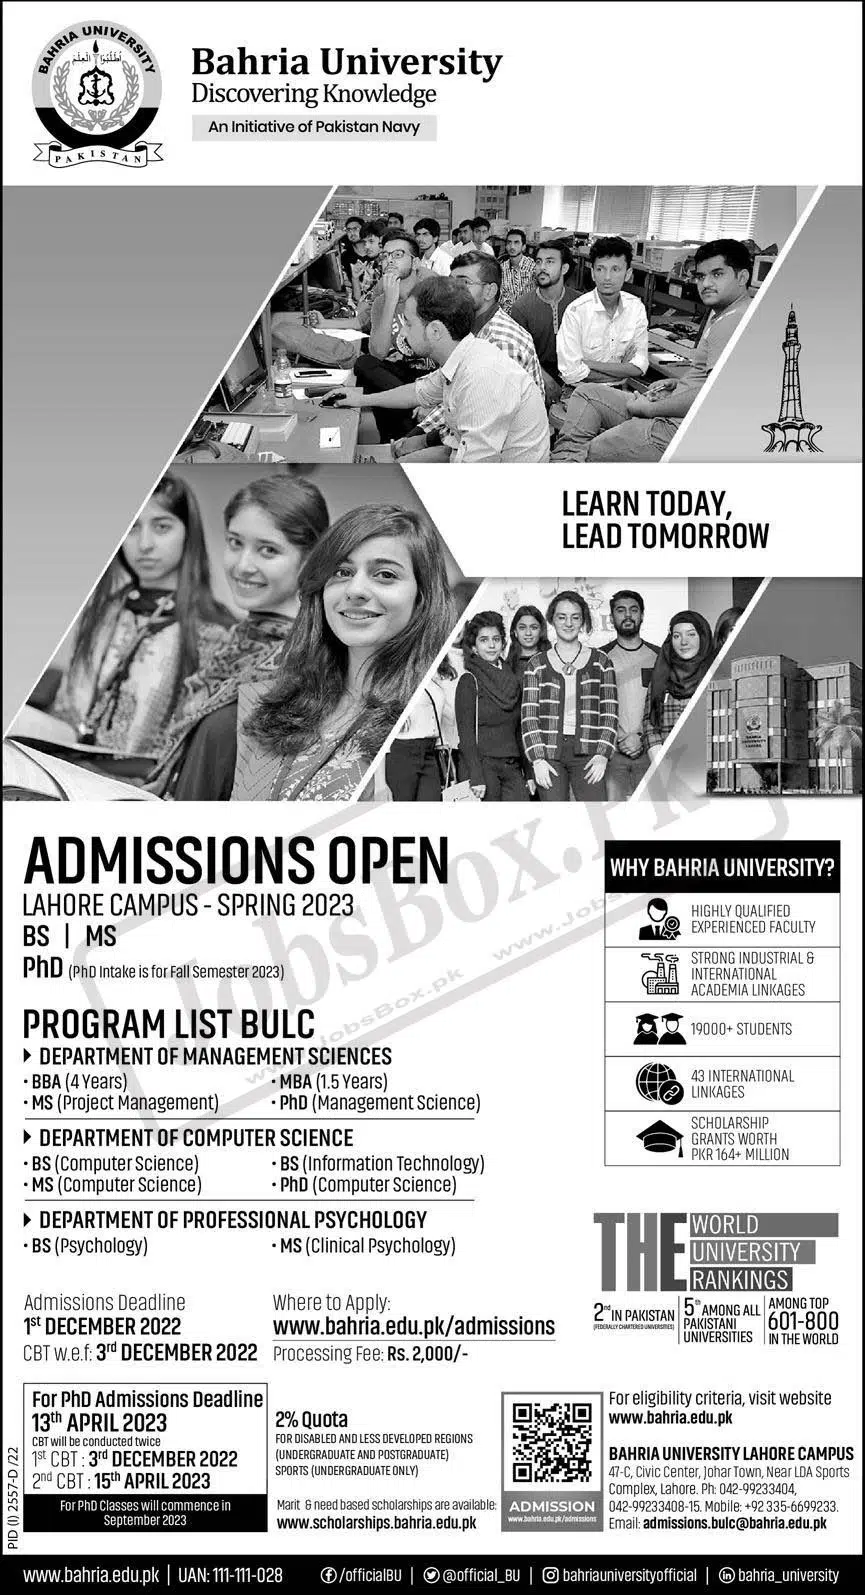  Bahria University Admissions Fall 2023 